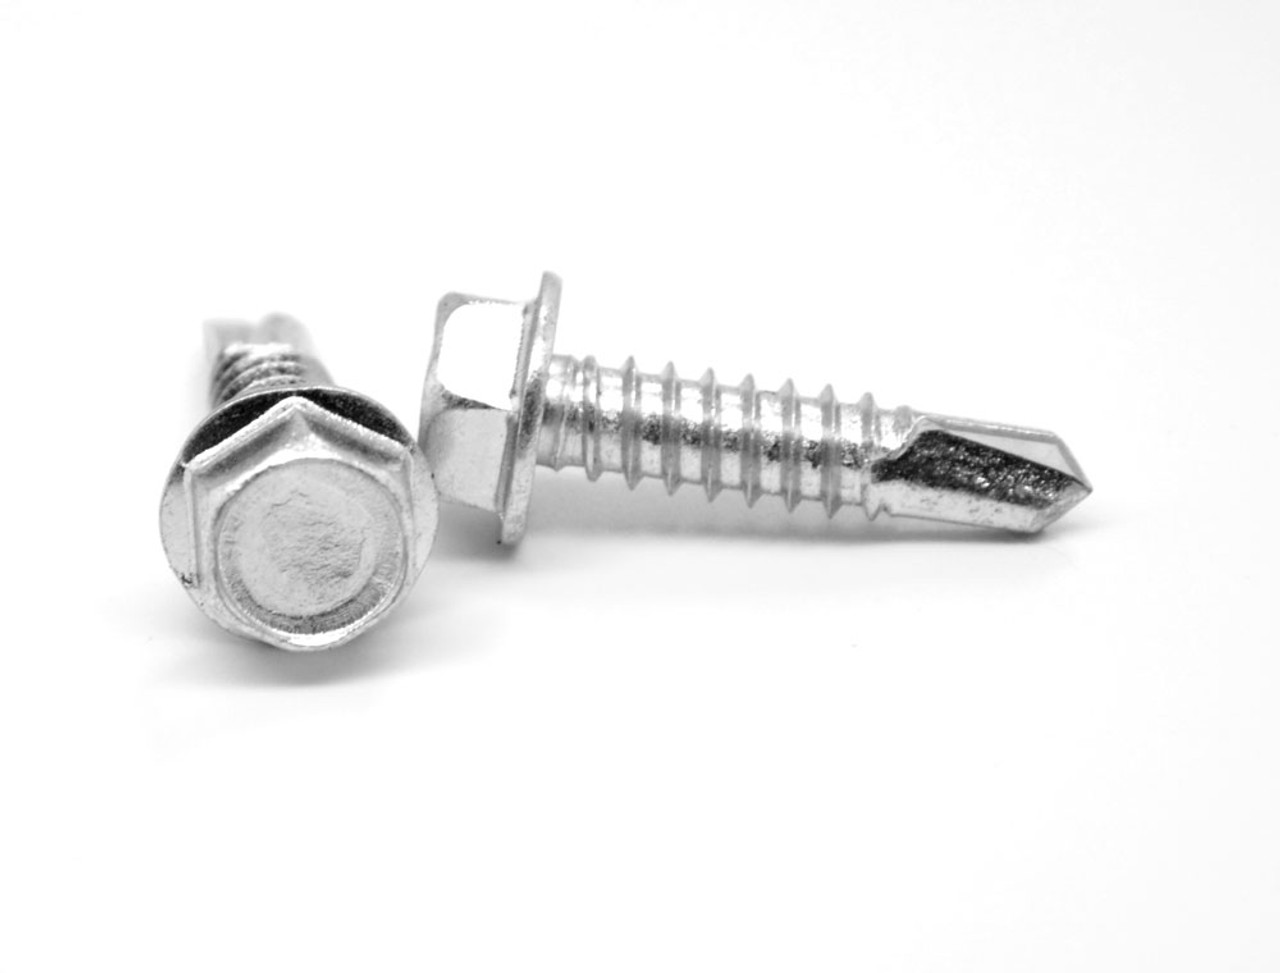 1/4-20 x 1 Coarse Thread Self Drilling Screw Hex Washer Head #3 Point Low Carbon Steel Zinc Plated